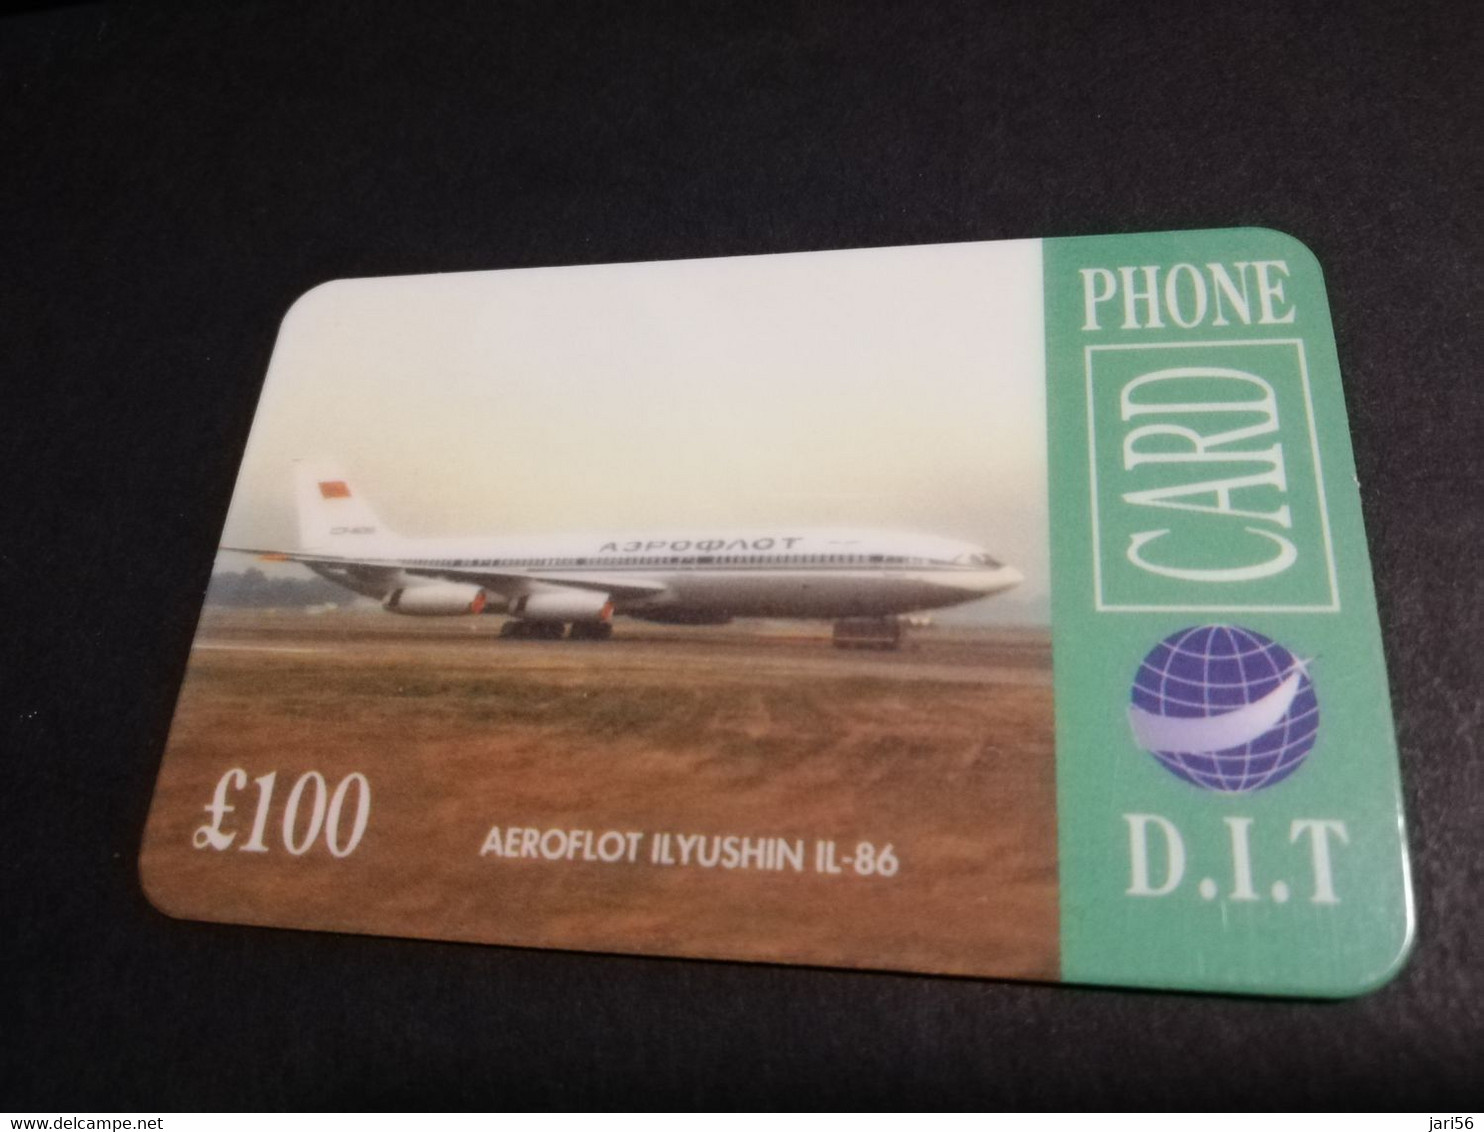 GREAT BRITAIN   100 POUND  AIR PLANES    DIT PHONECARD    PREPAID CARD      **5913** - Collections